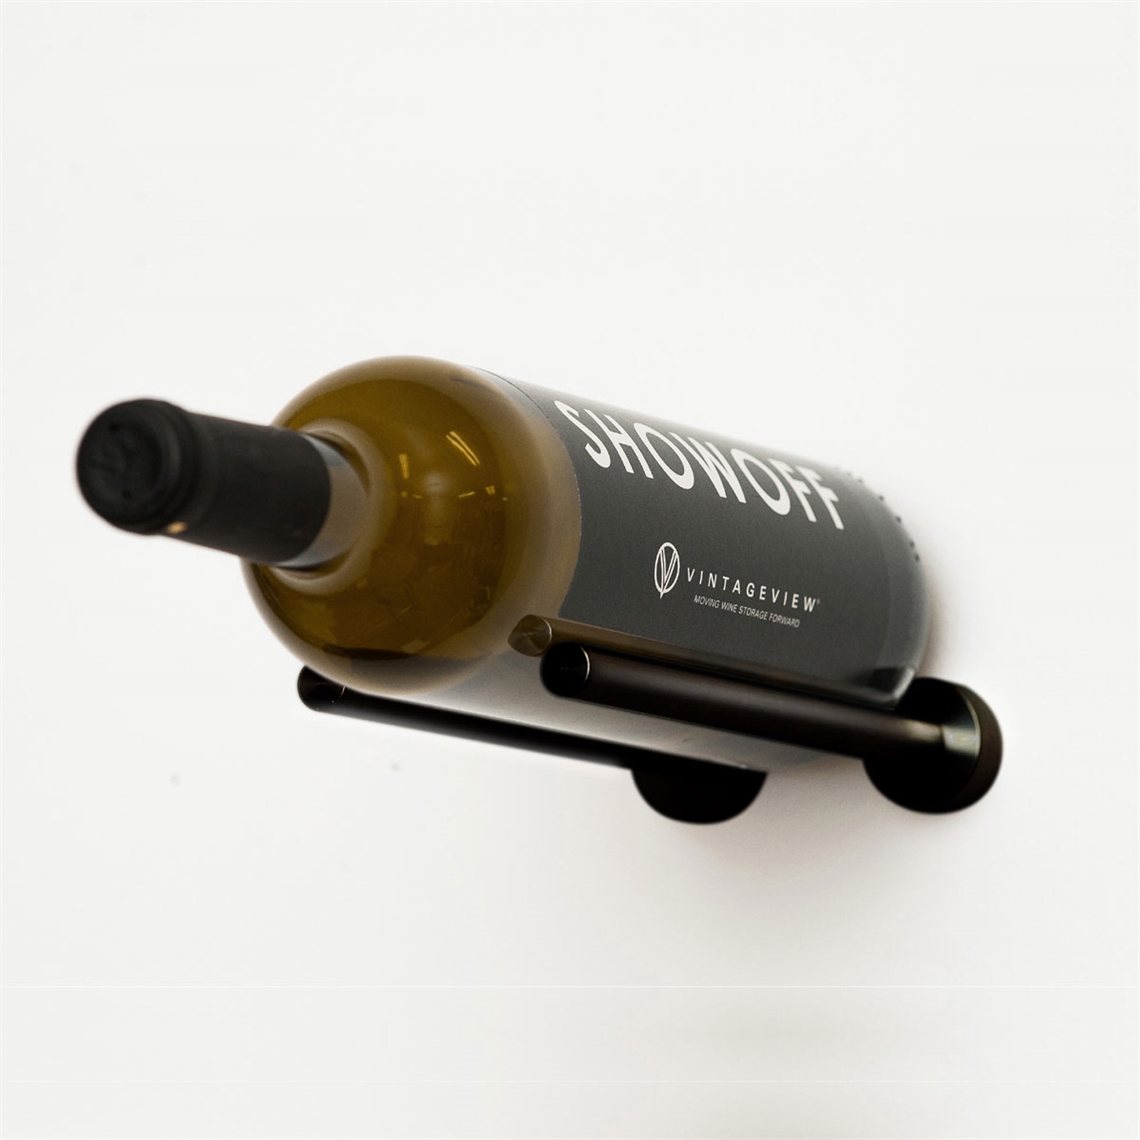 View more cellarstak from our Wall Mounted Wine Racks range